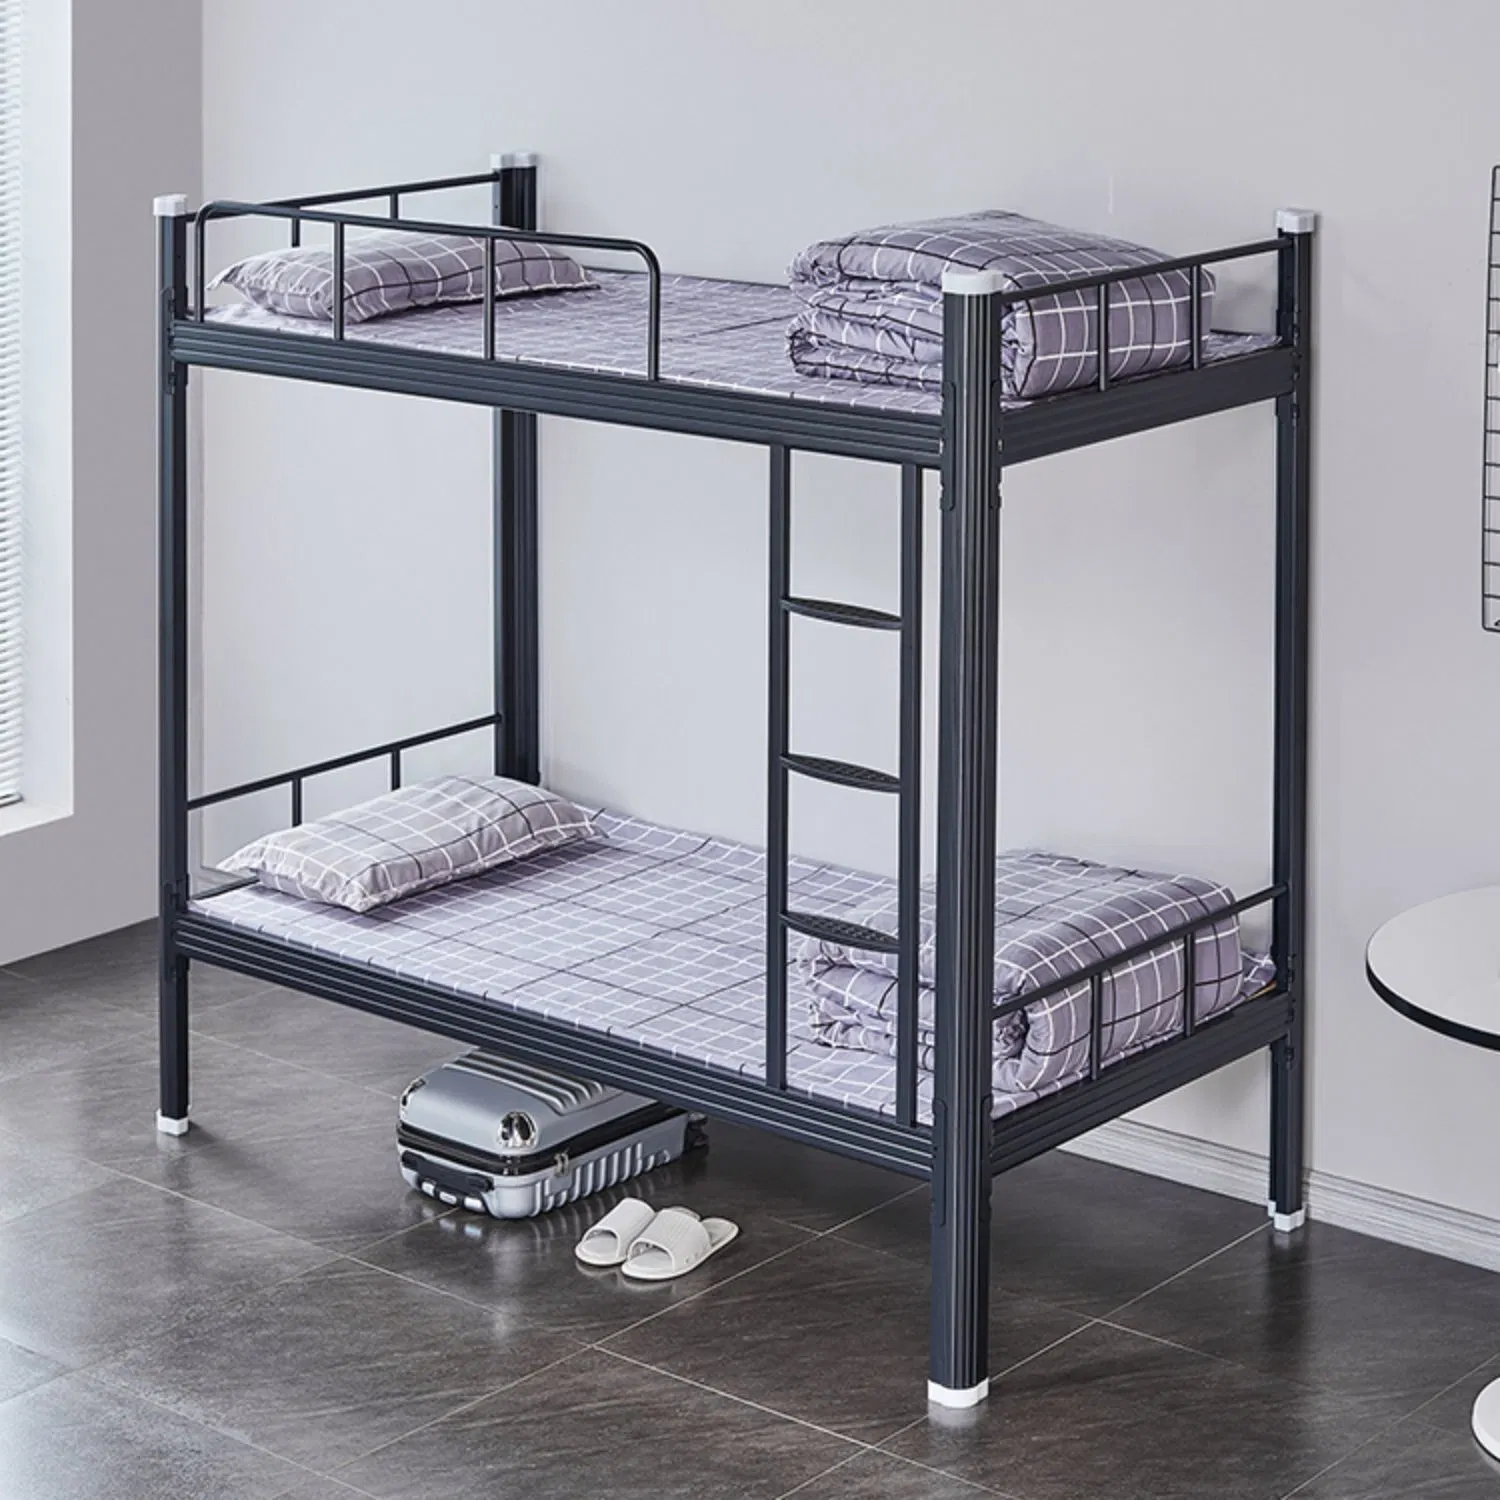 Steel Frame Student Iron Double Dormitory Bed School Metal Furniture